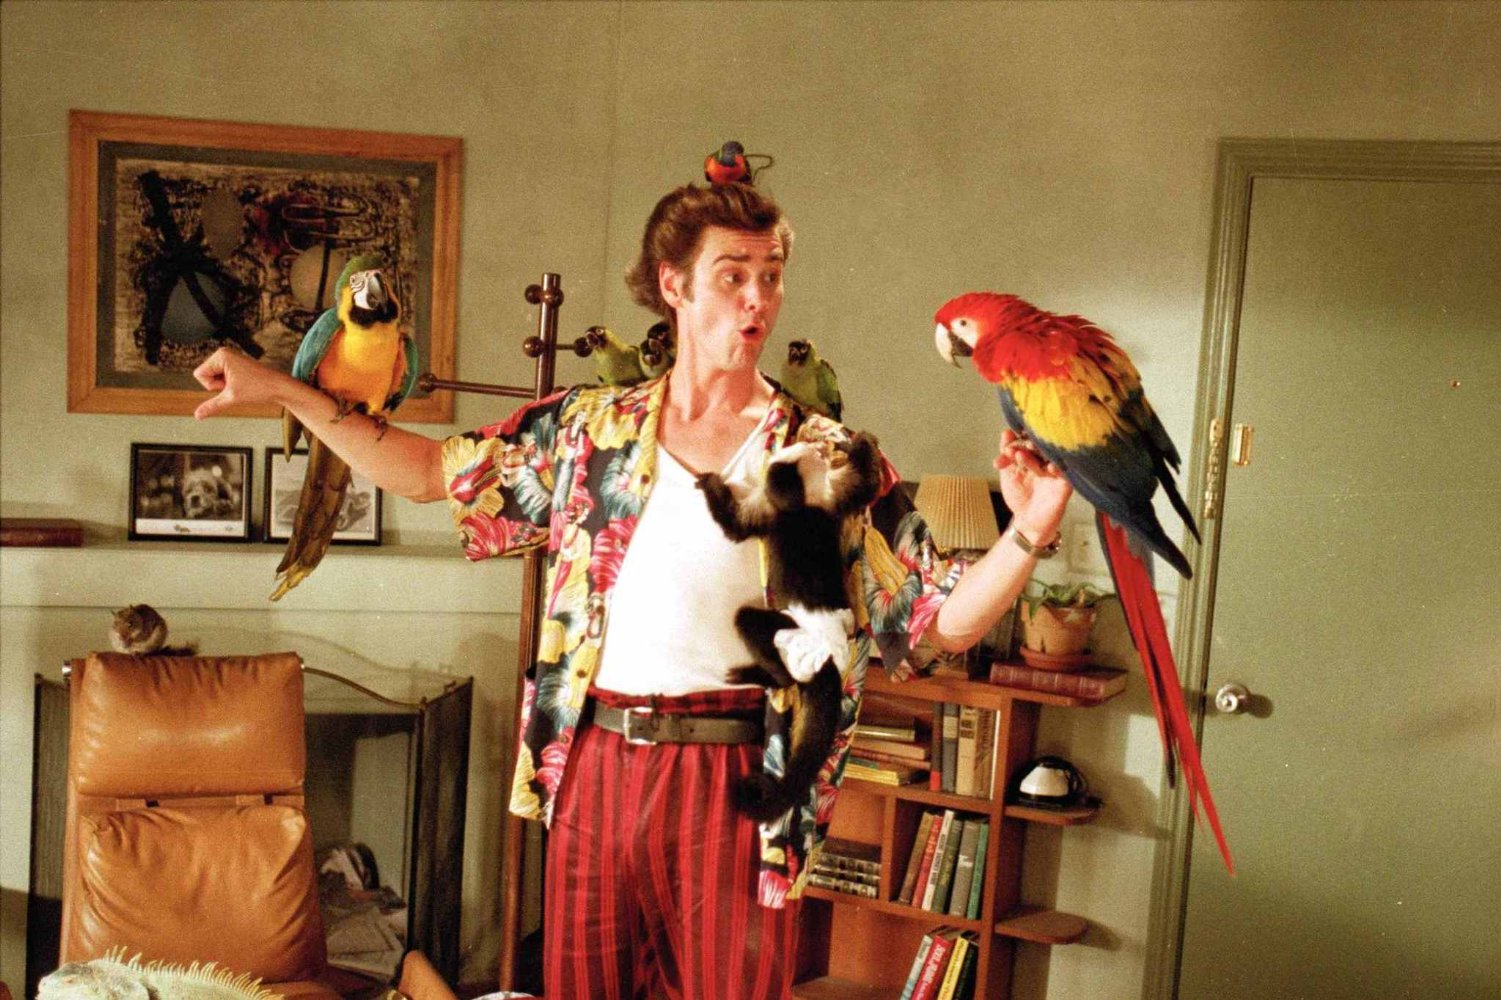 Watch Movies TV Shows with character Ace Ventura for free! List of Movies: Ace Ventura When Nature Calls, Ace Ventura: Pet Detective